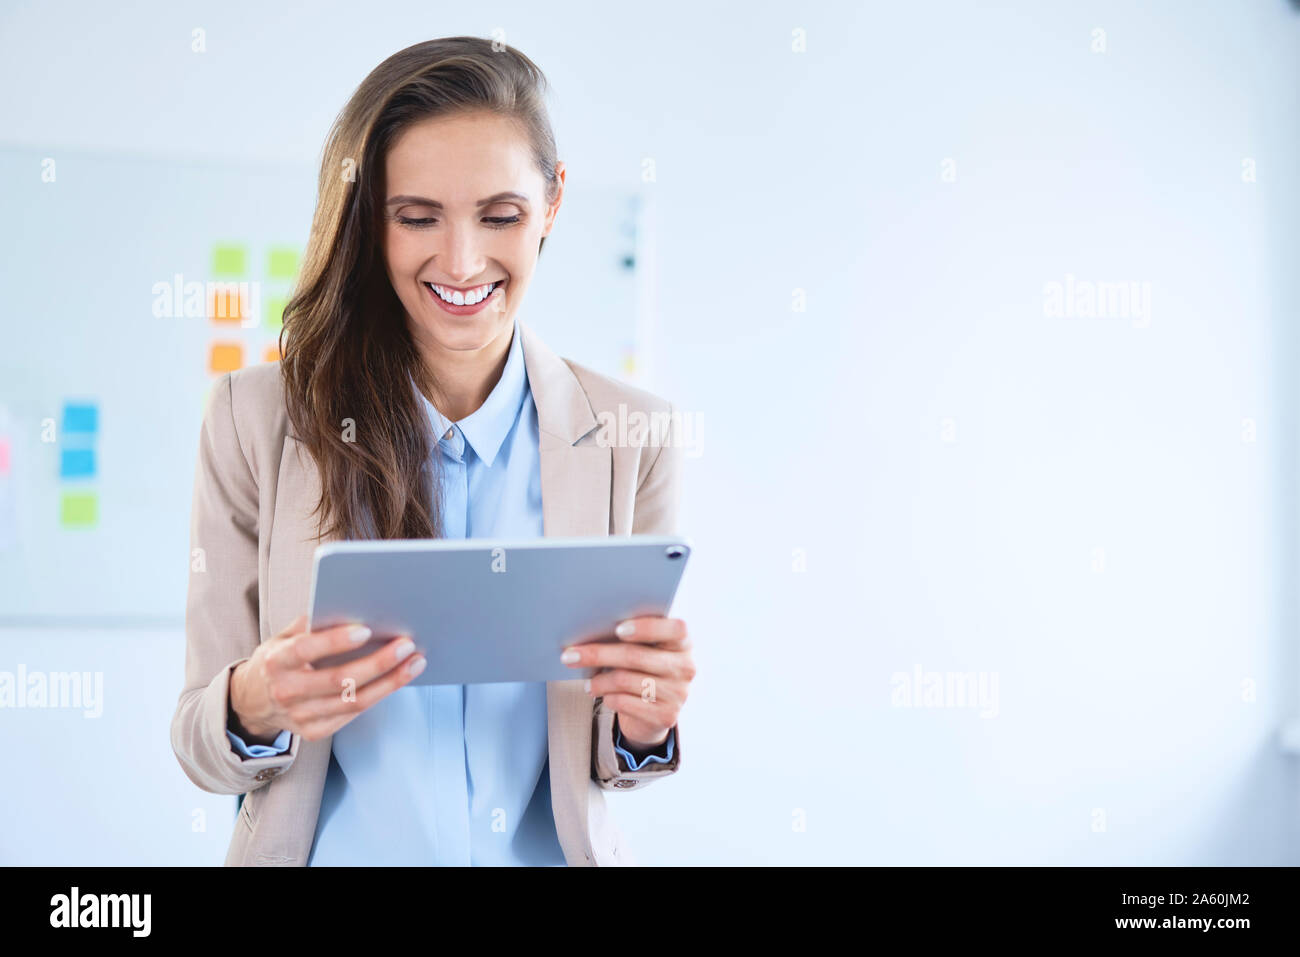 Smiling businesswoman using tablet in office Banque D'Images